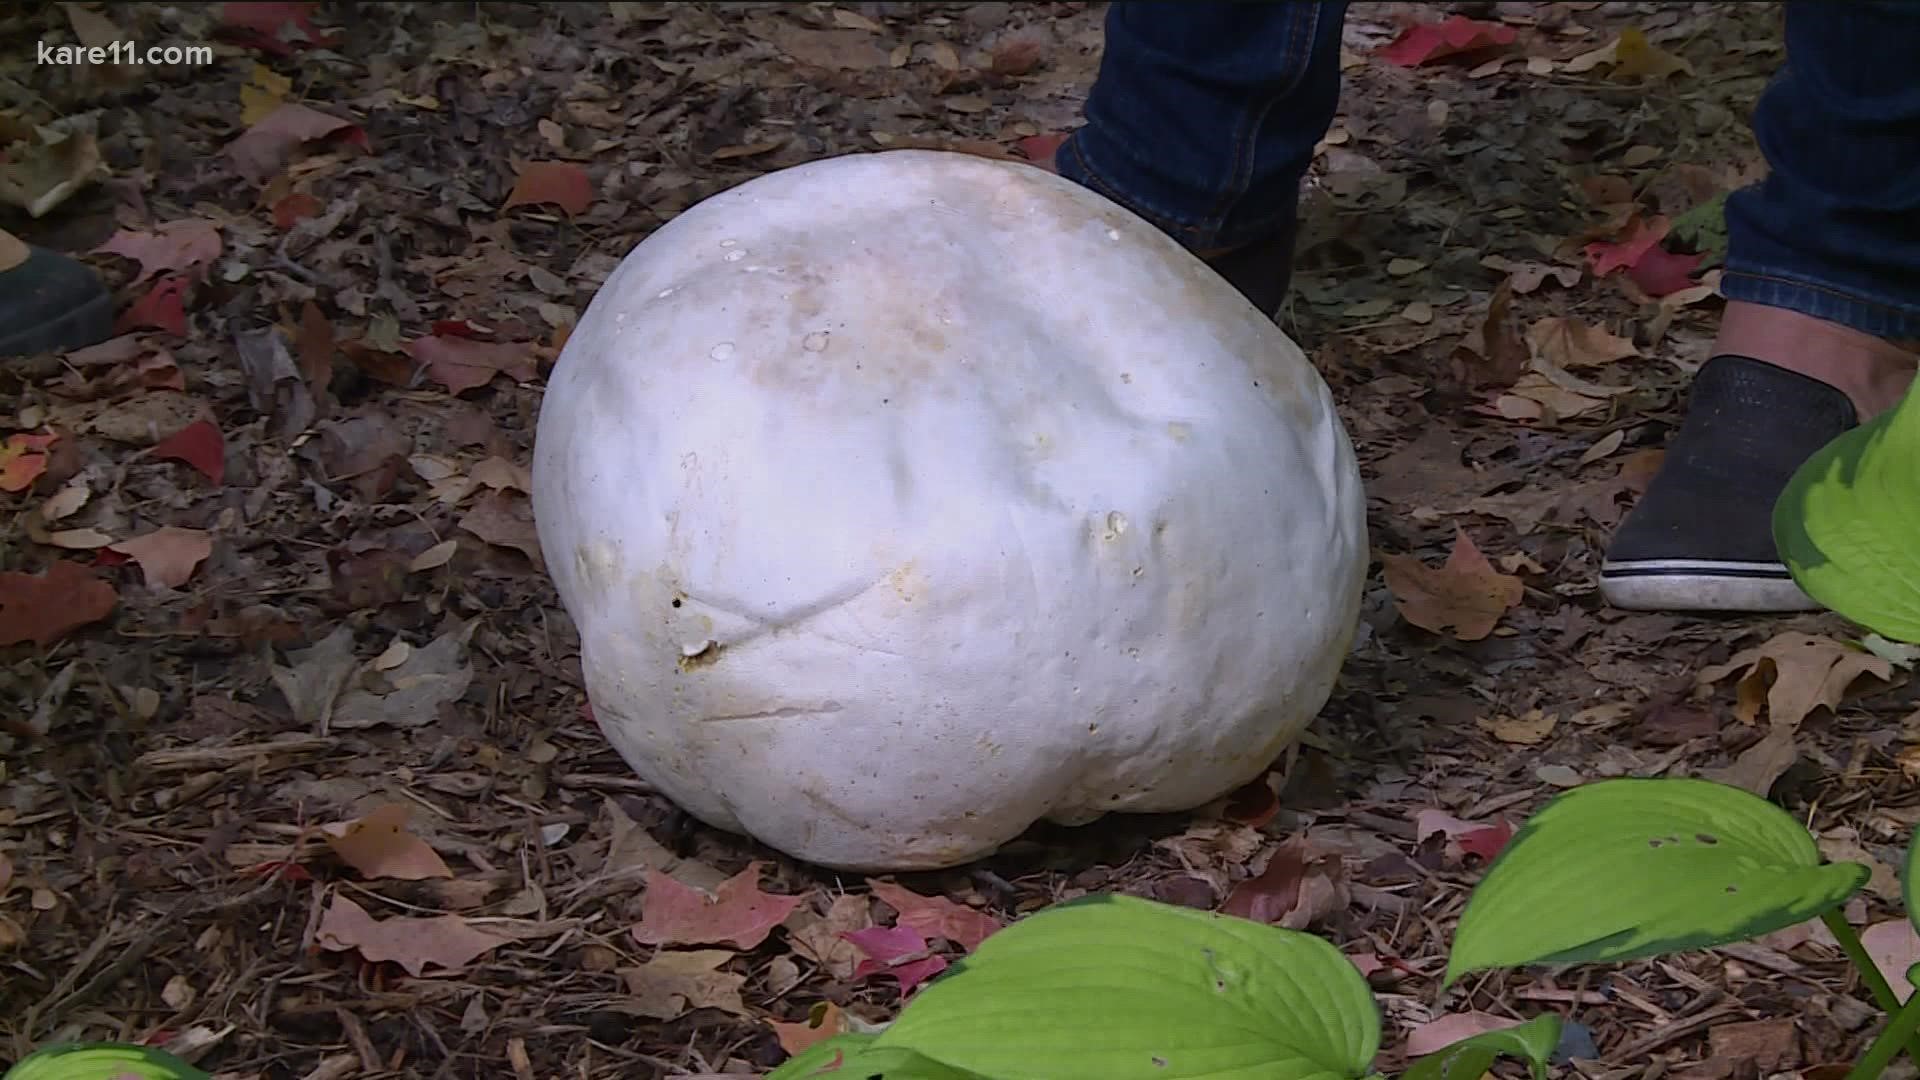 Tis the season for puffball mushrooms. So many of you have posted pictures of the giant white mushrooms growing in your yards. And yes, they're edible!